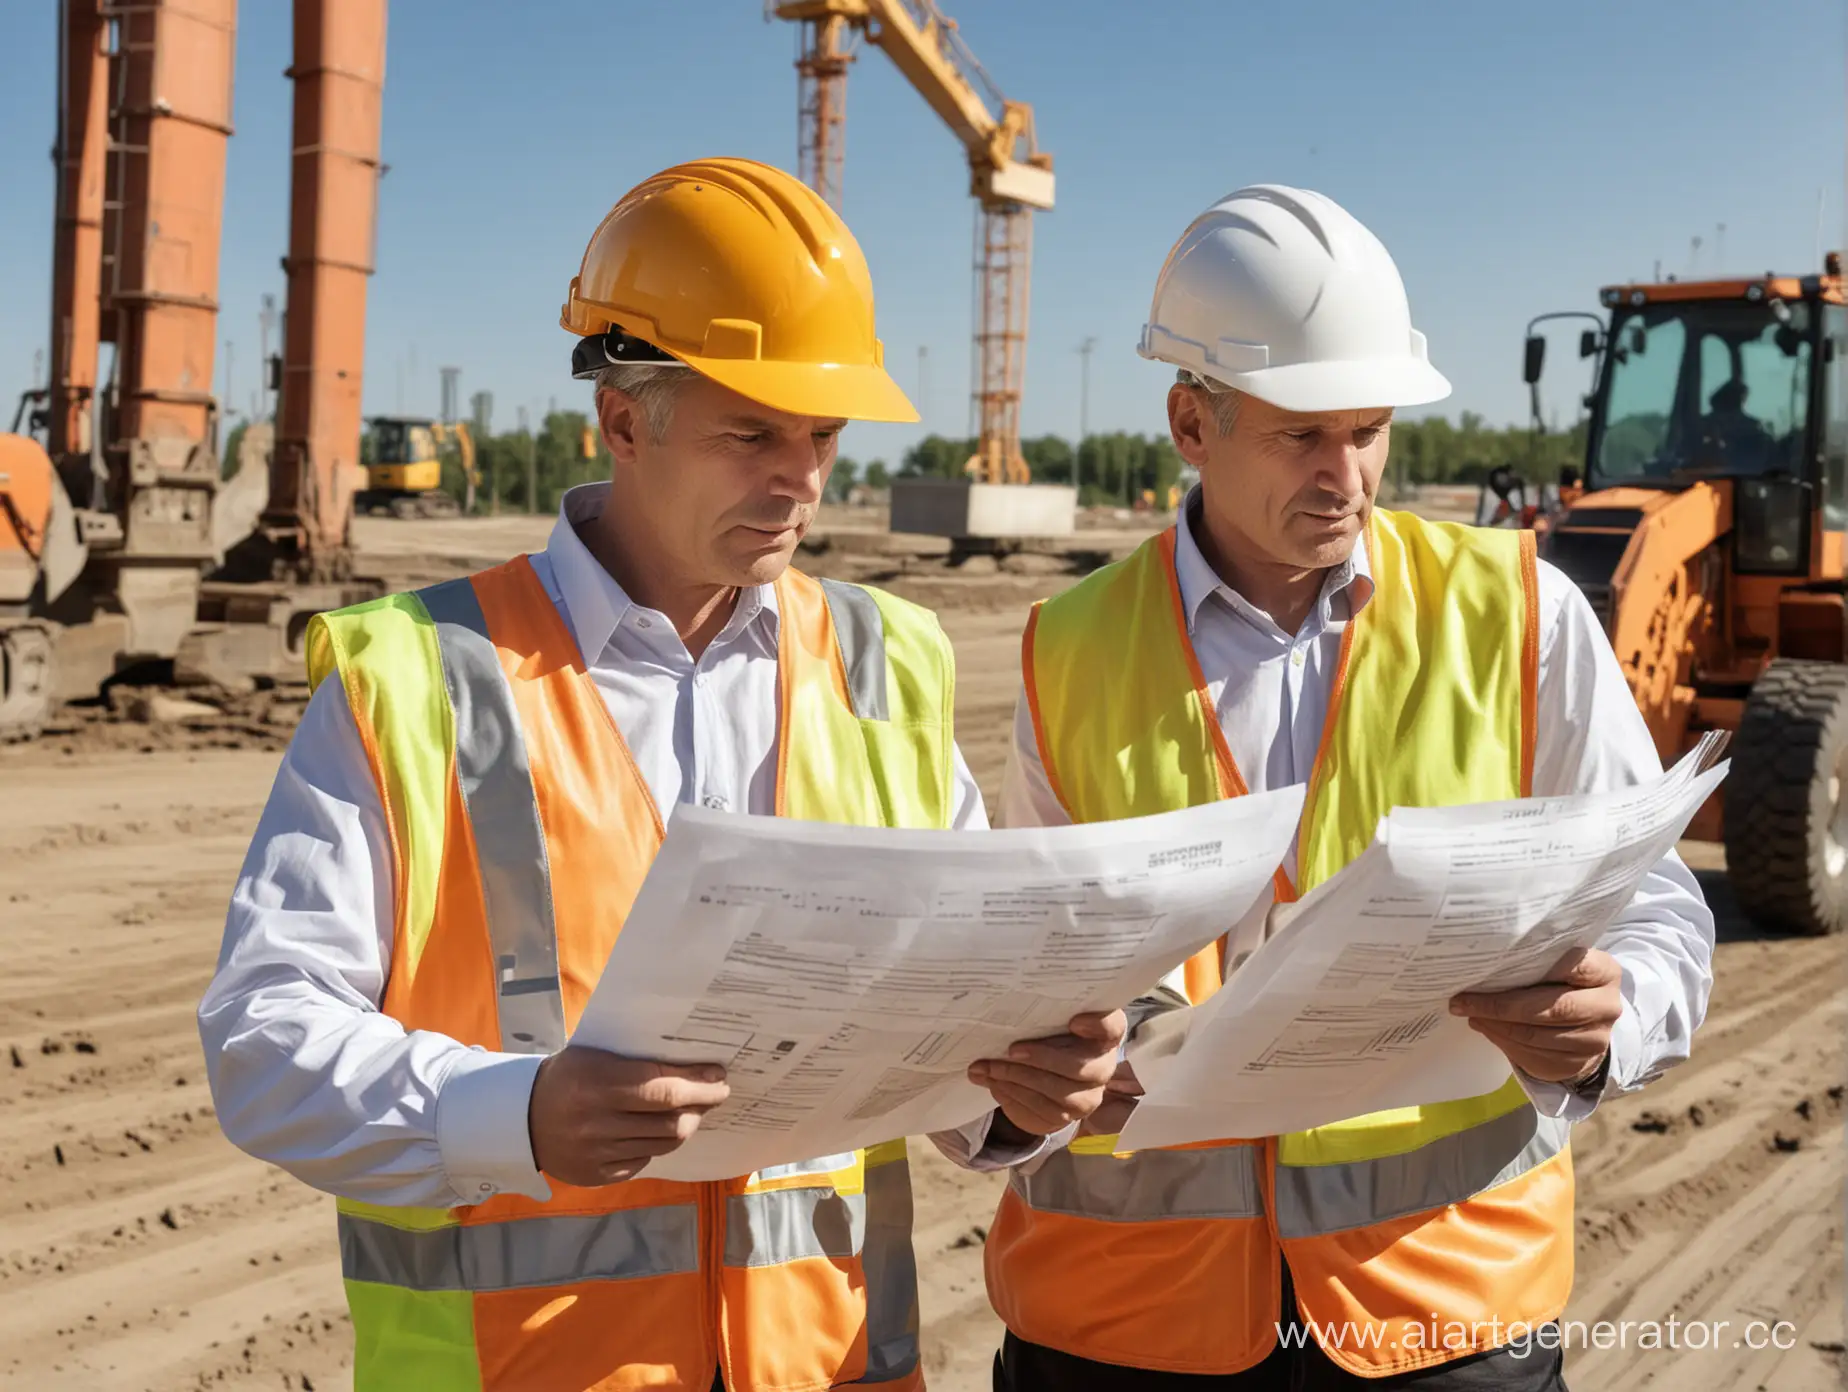 Construction-Workers-Reviewing-Documents-with-Machinery-in-Background-on-Sunny-Day